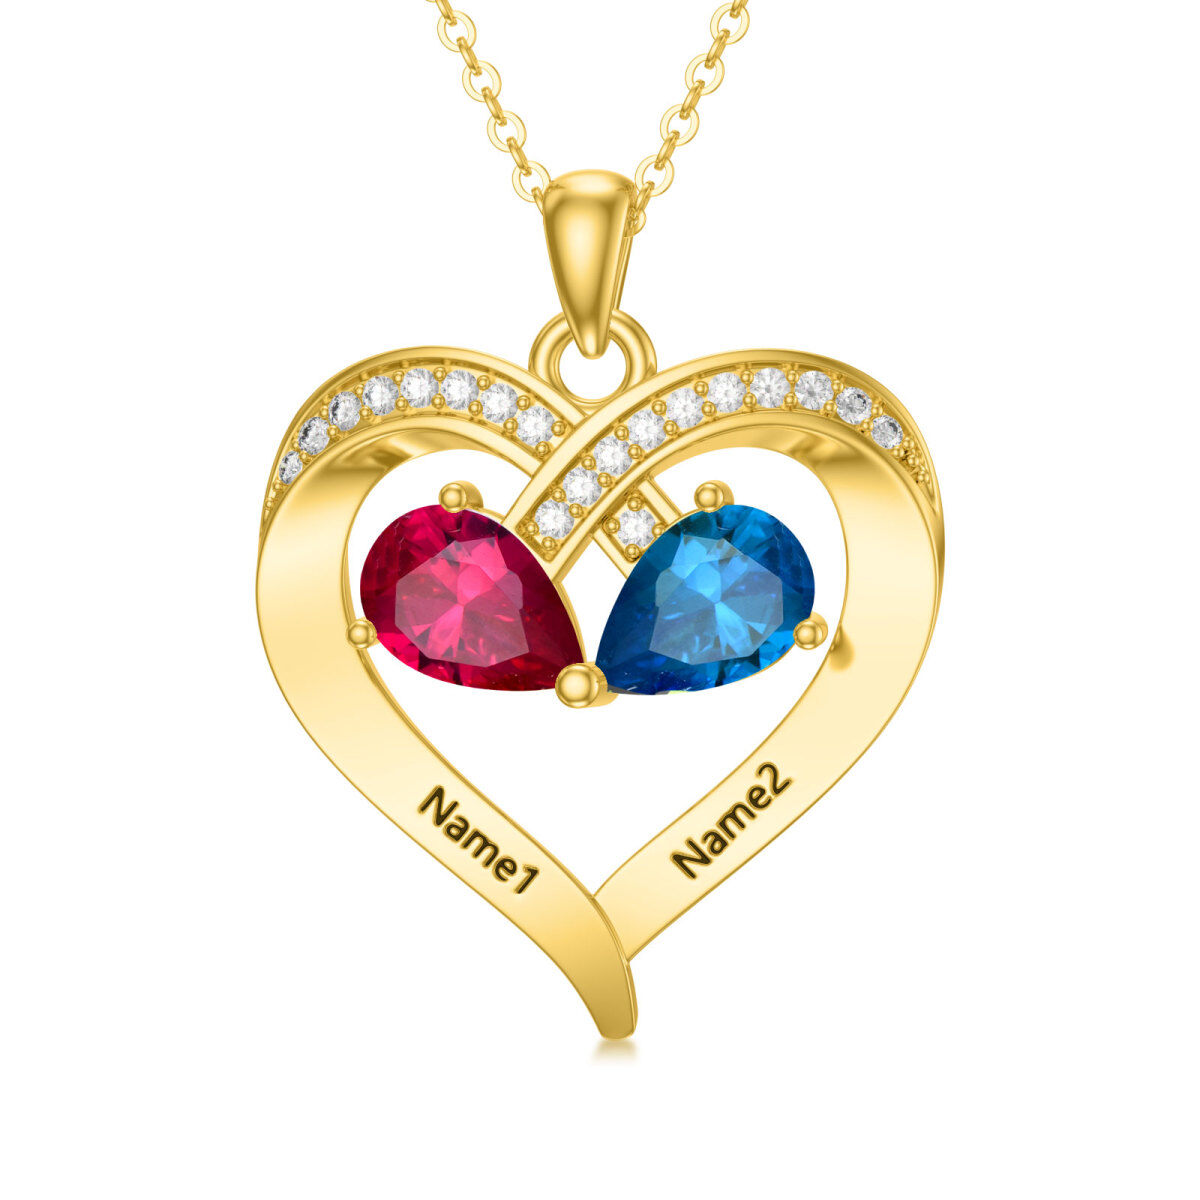 10K Gold Personalized Engraving & Birthstone Heart Pendant Necklace-1